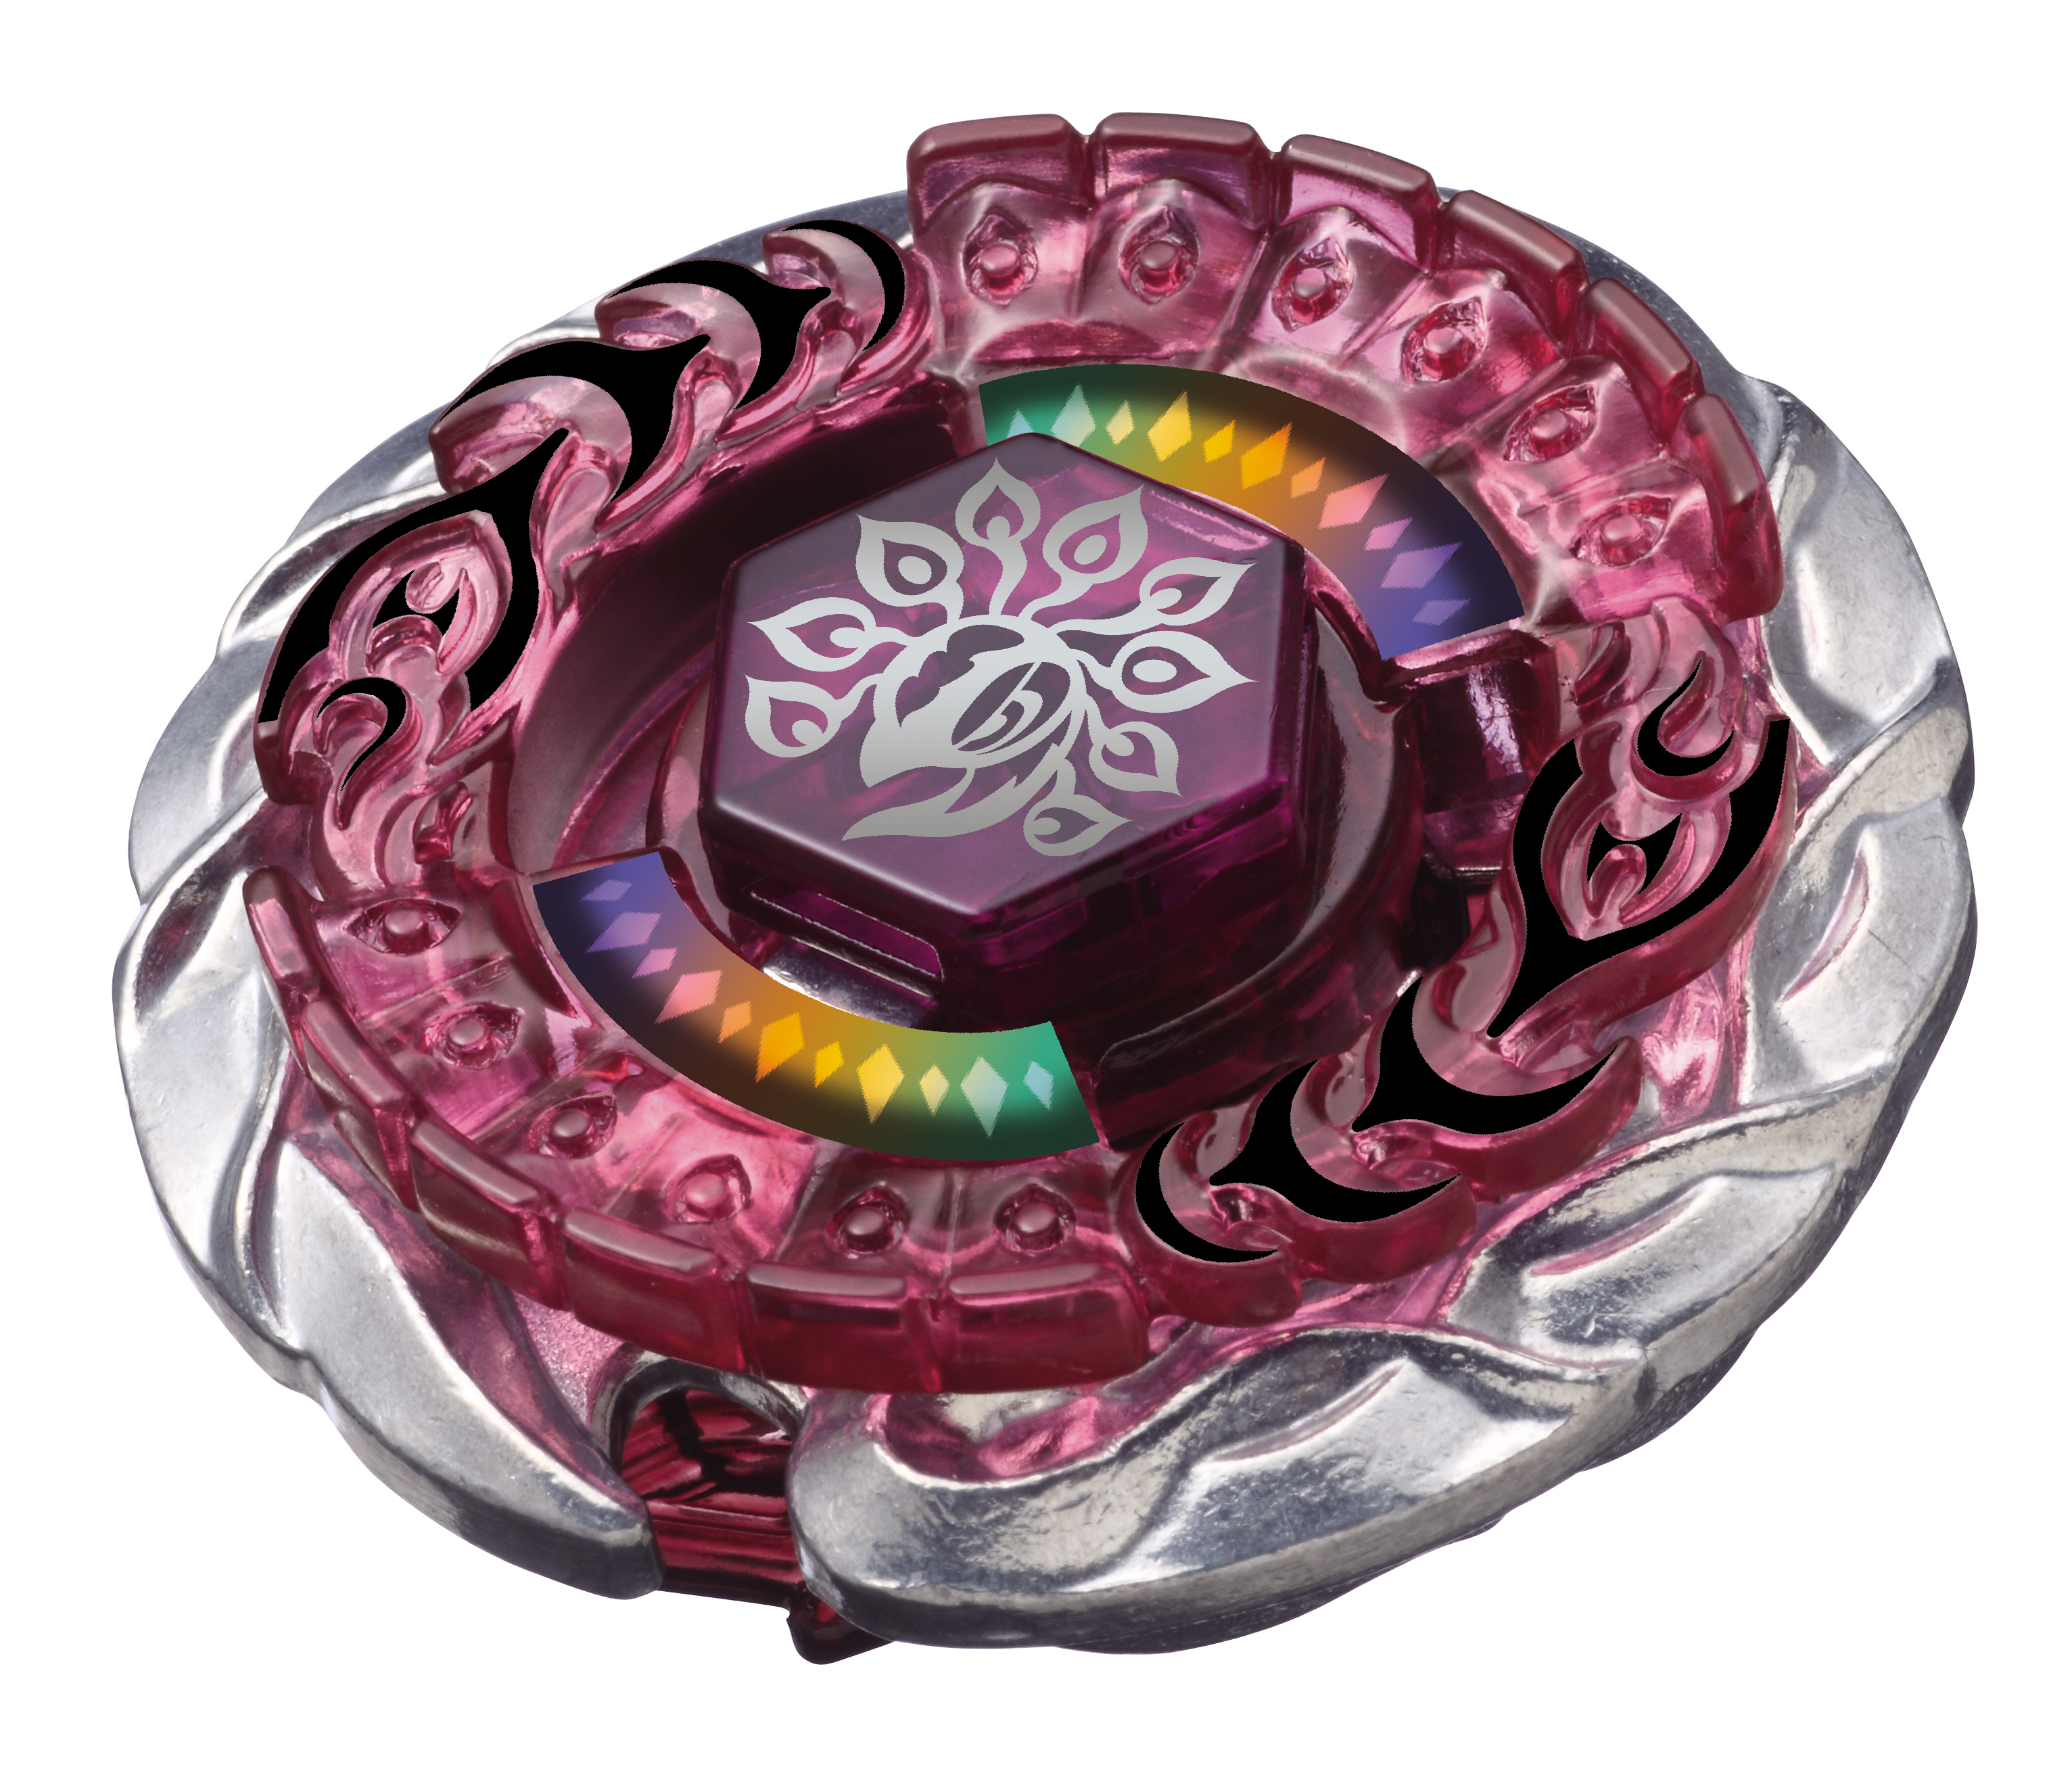 Download this Evil Befall Uwewd Beyblade Wiki The Free Encyclopedia picture